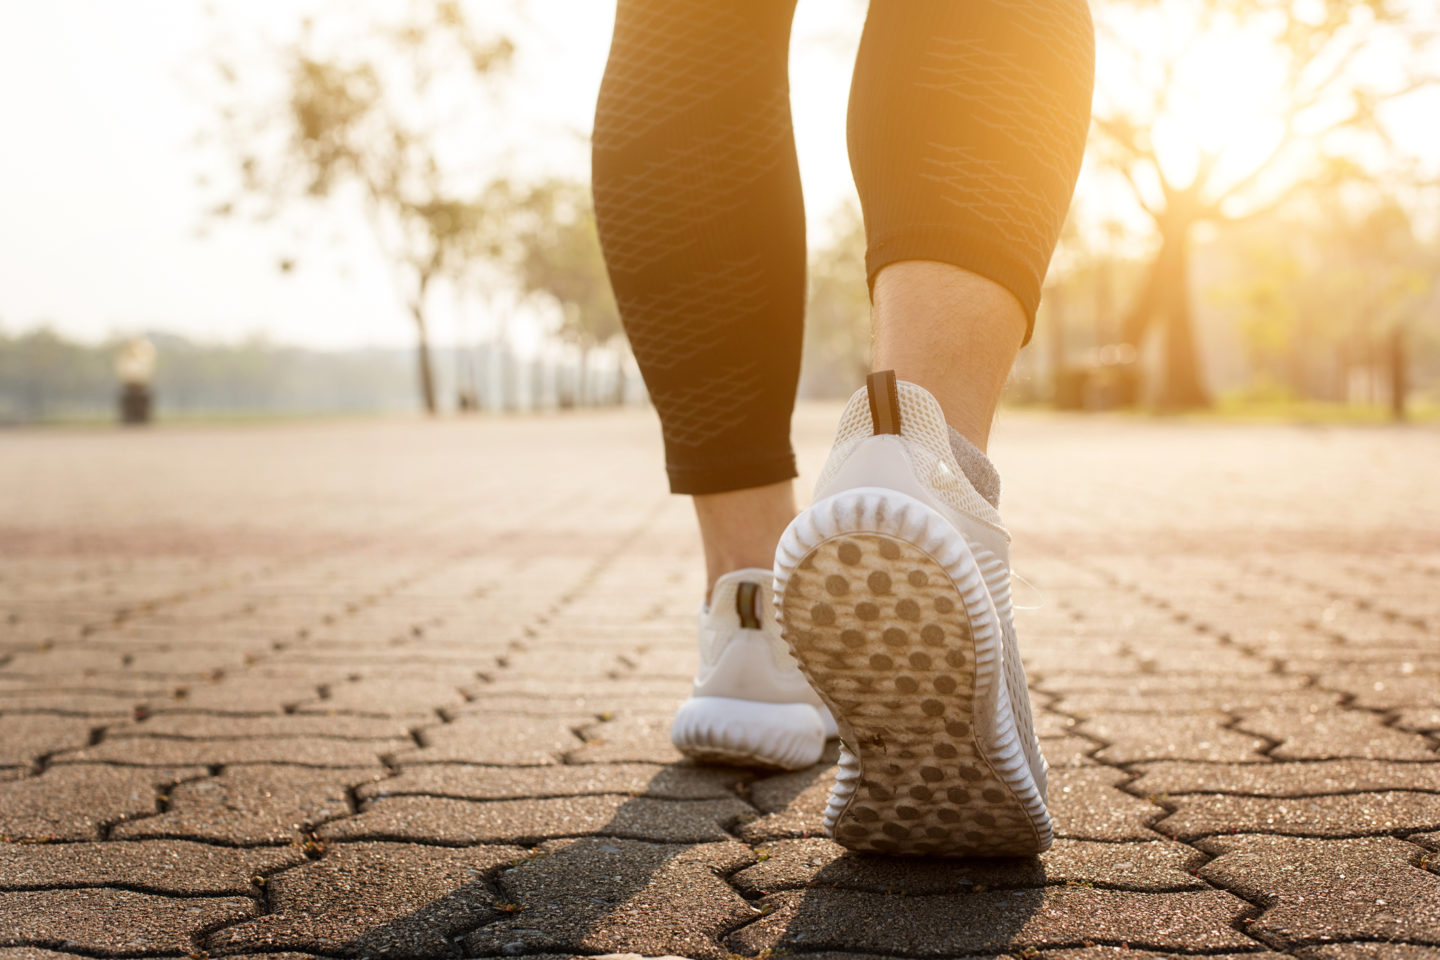 Want to Improve Your Fertility? Walking Could Help